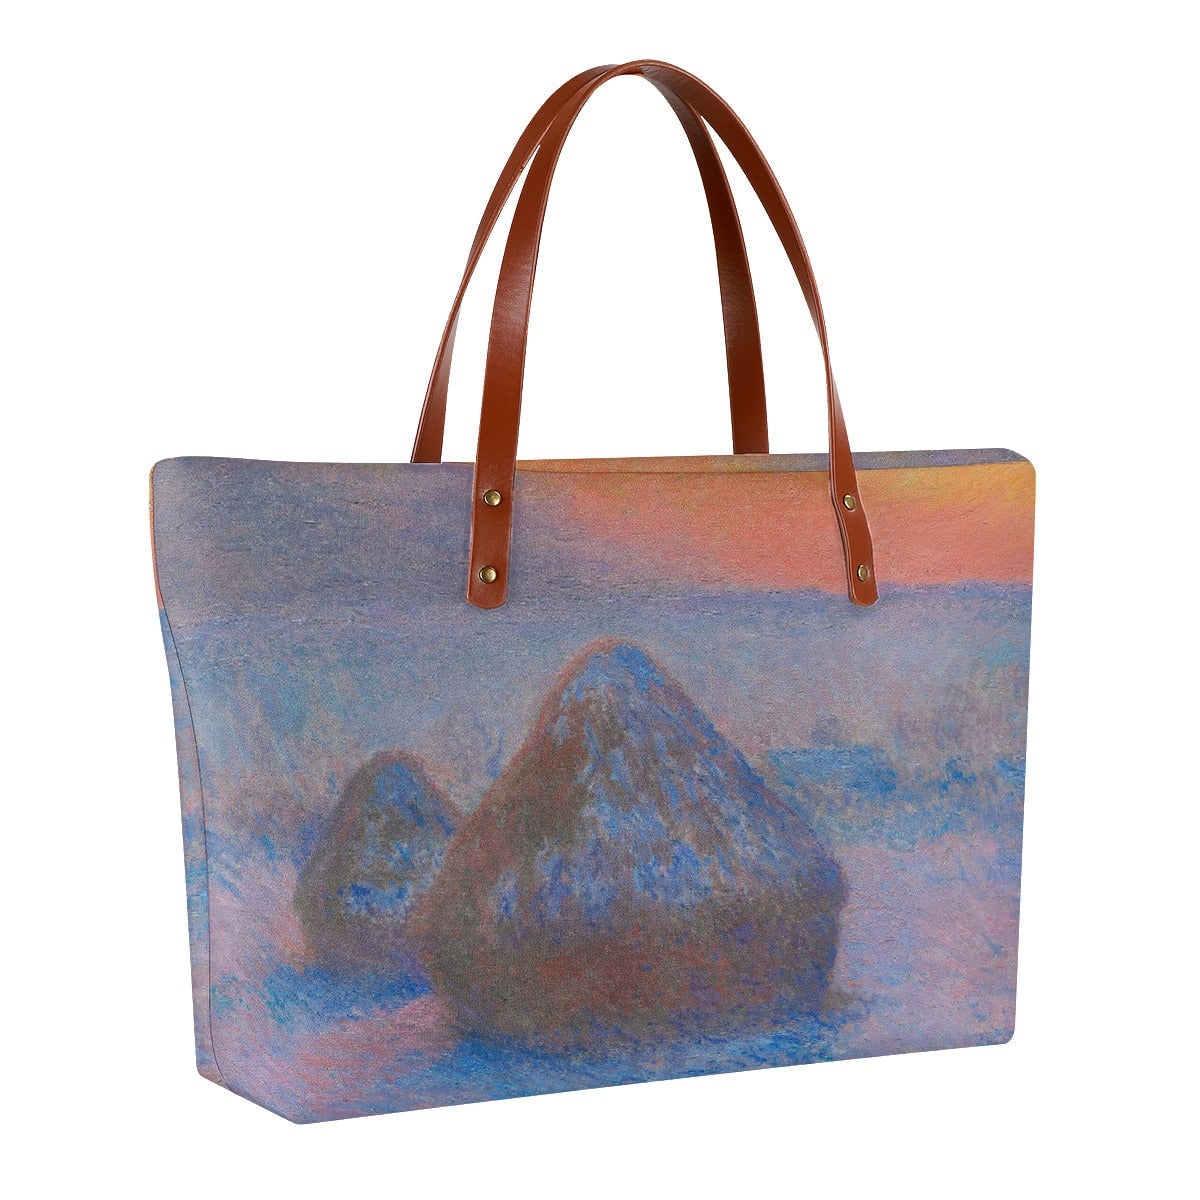 Stacks of Wheat Sunset by Claude Monet Tote Bag